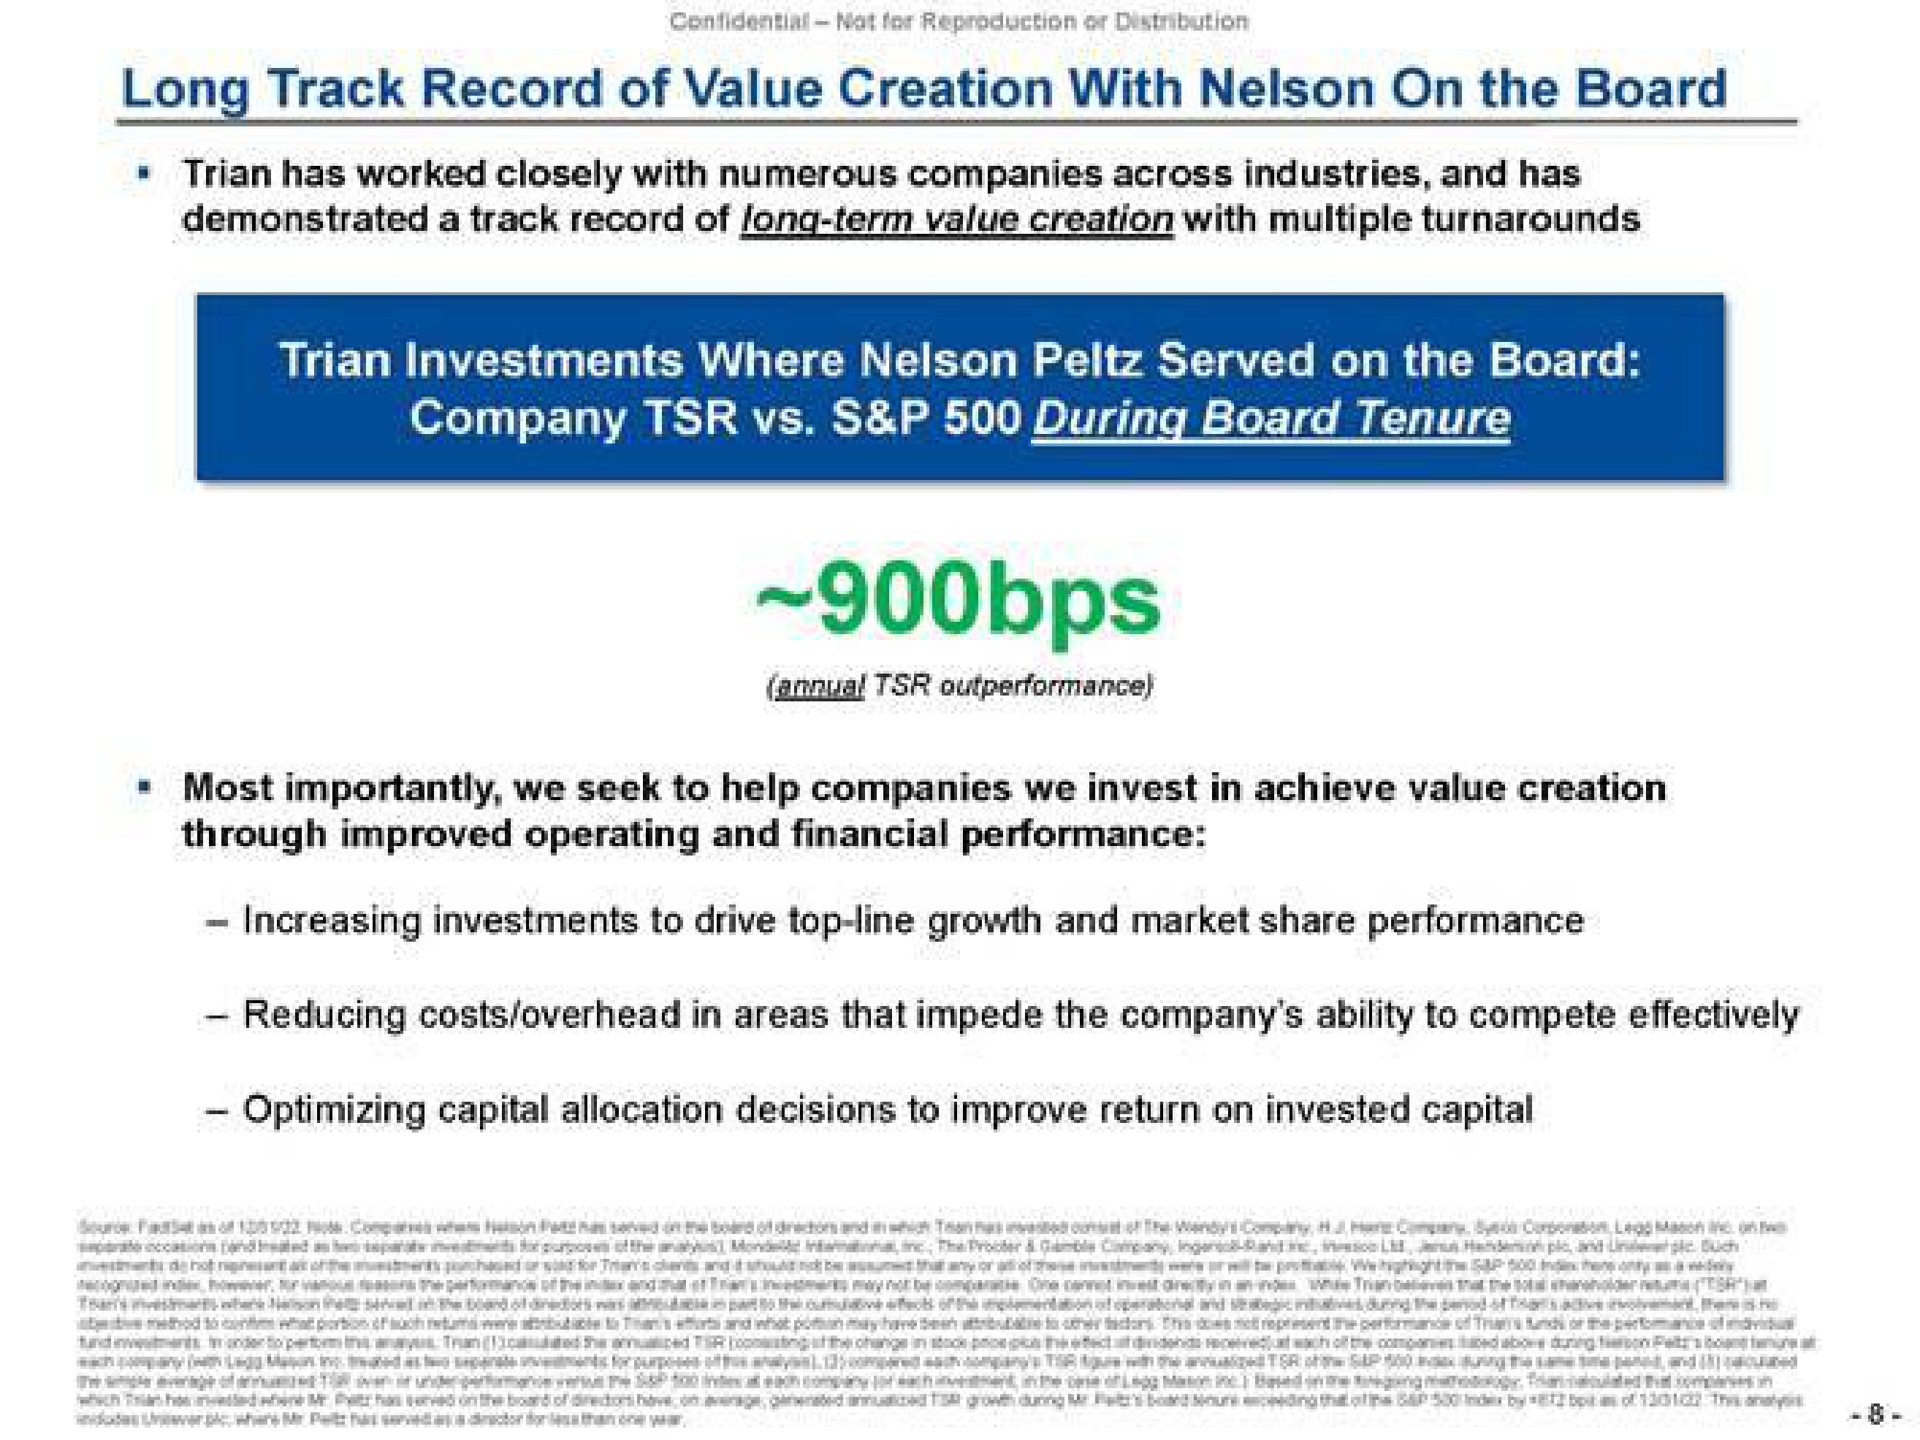 long track record of value creation with nelson on the board has worked closely with numerous companies across industries and has demonstrated a track record of term value creation with multiple turnarounds investments where nelson served on the board company during board tenure most importantly we seek to help companies we invest in achieve value creation through improved operating and financial performance increasing investments to drive top line growth and market share performance reducing costs overhead in areas that impede the company ability to compete effectively optimizing capital allocation decisions to improve return on invested capital | Trian Partners